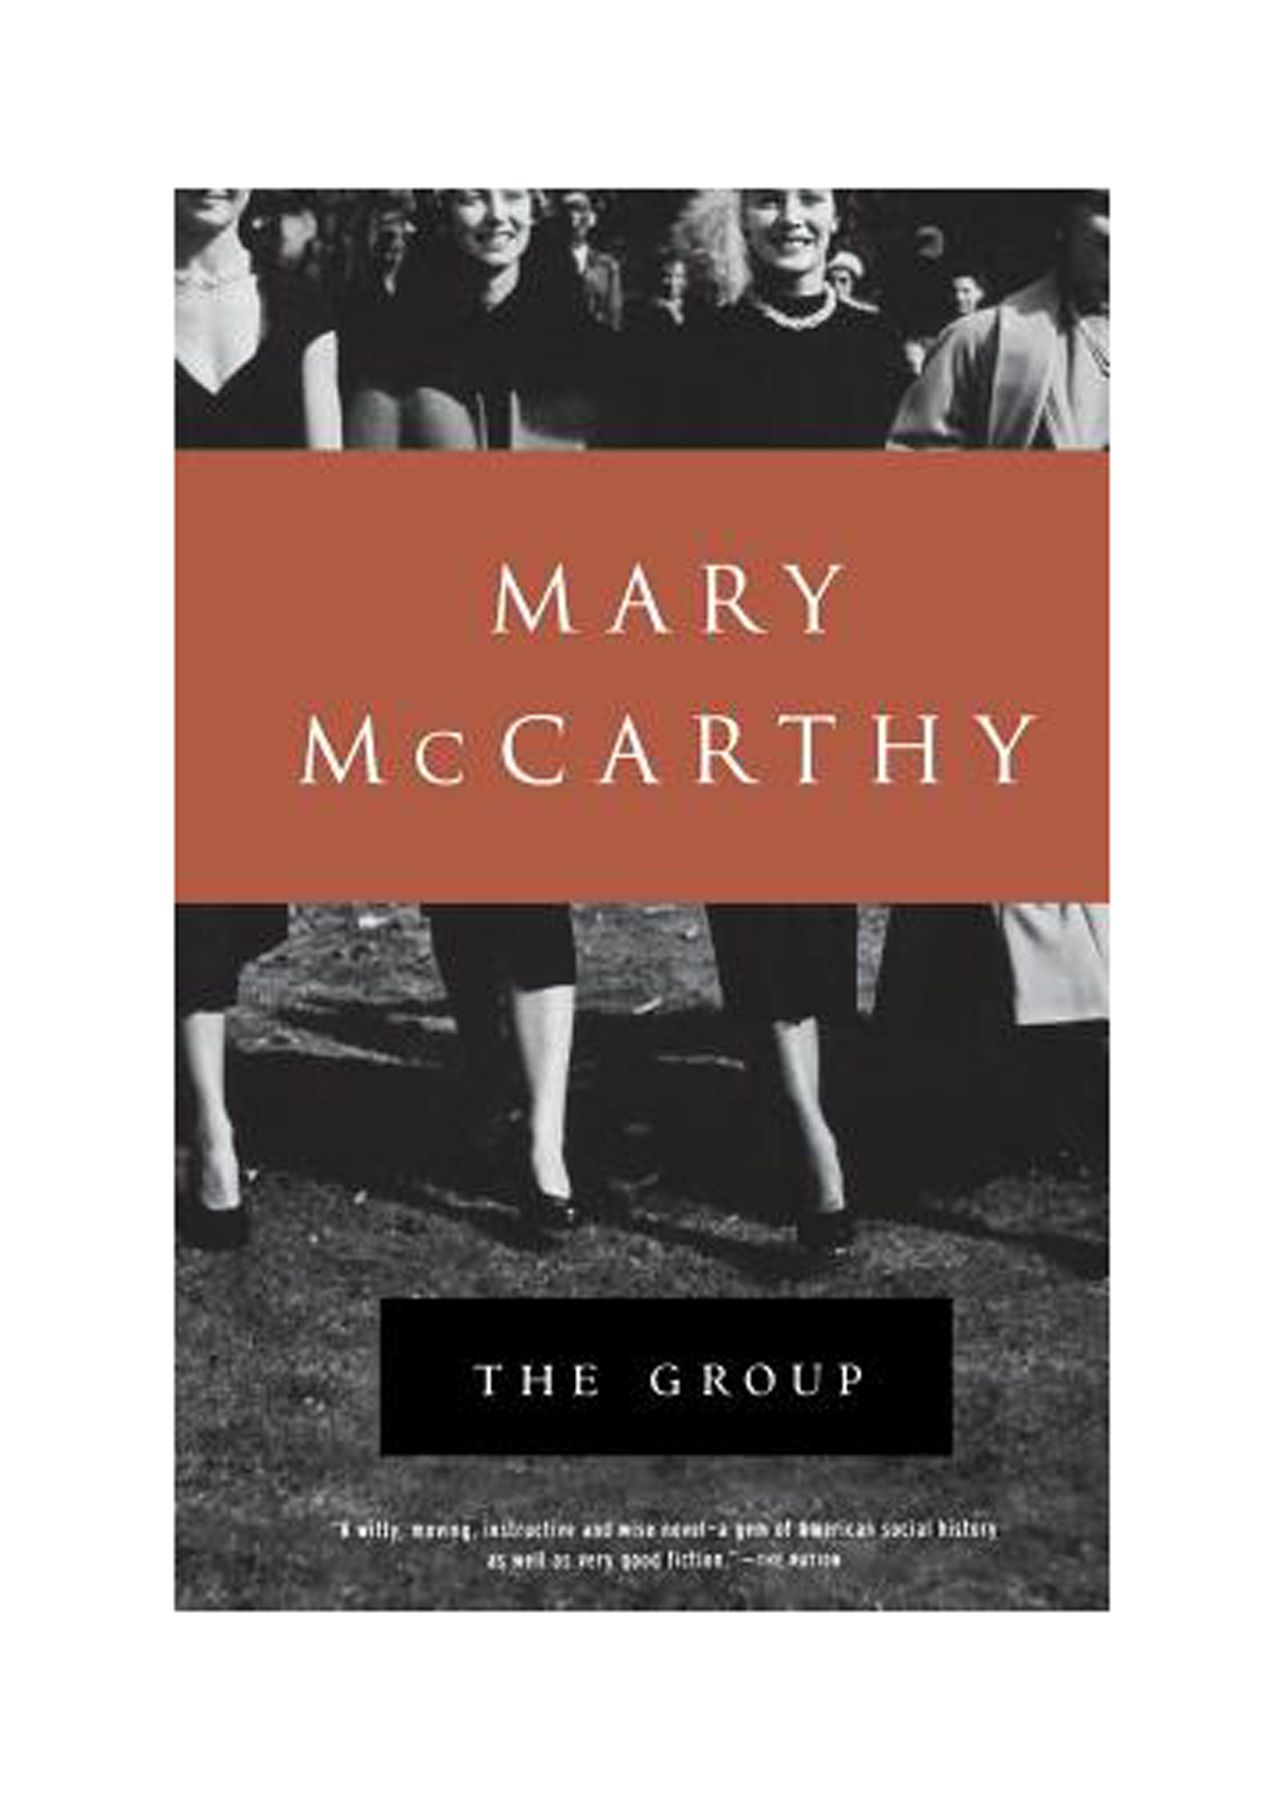 Good Books to Read in Your 20s: ‘The Group’ by Mary McCarthy